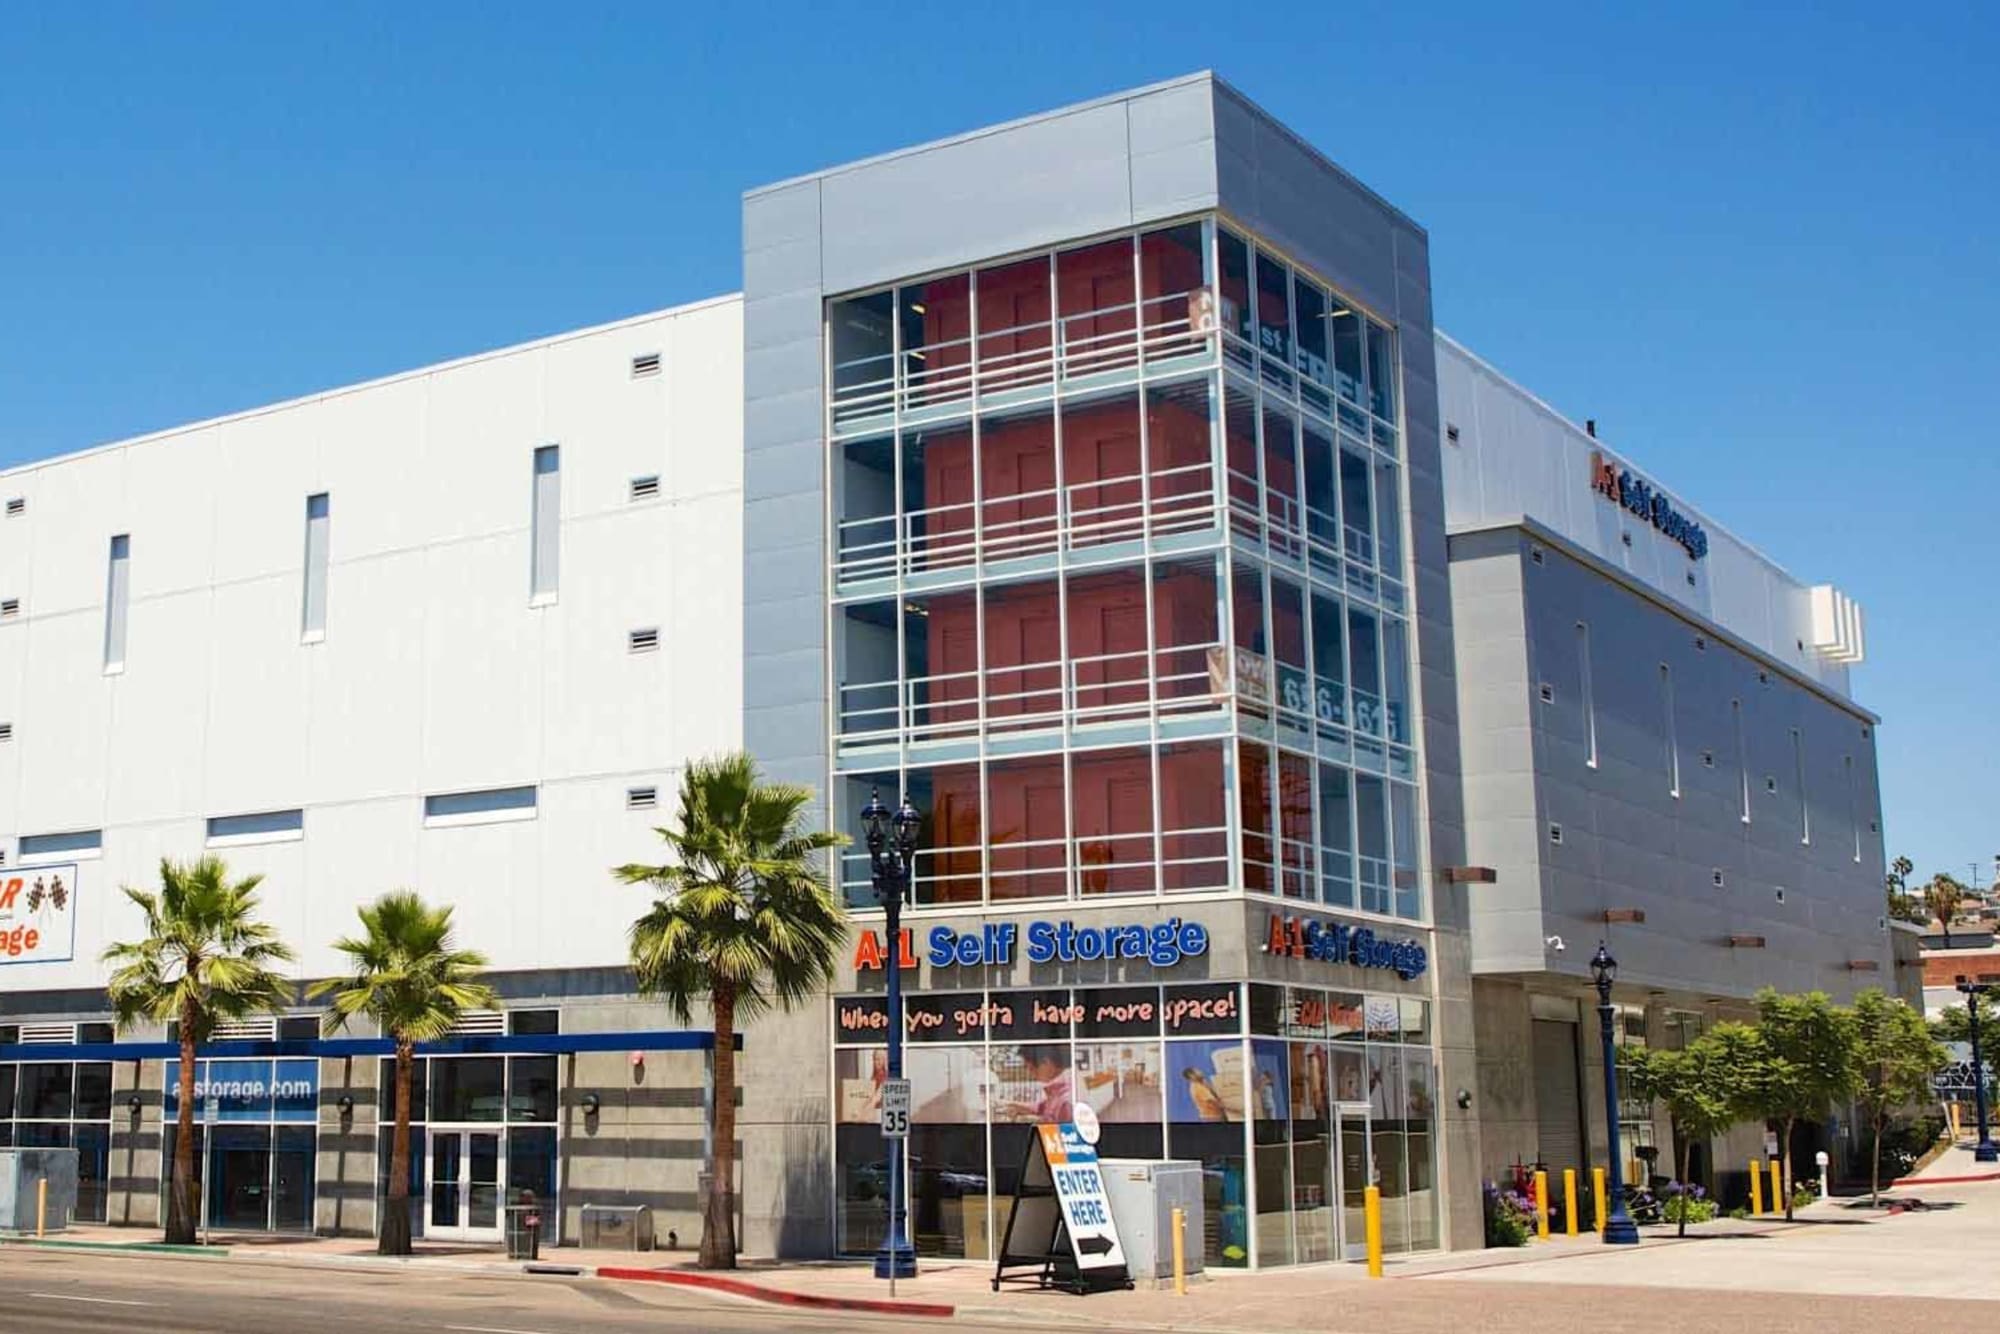 The front entrance to A-1 Self Storage in San Diego, California